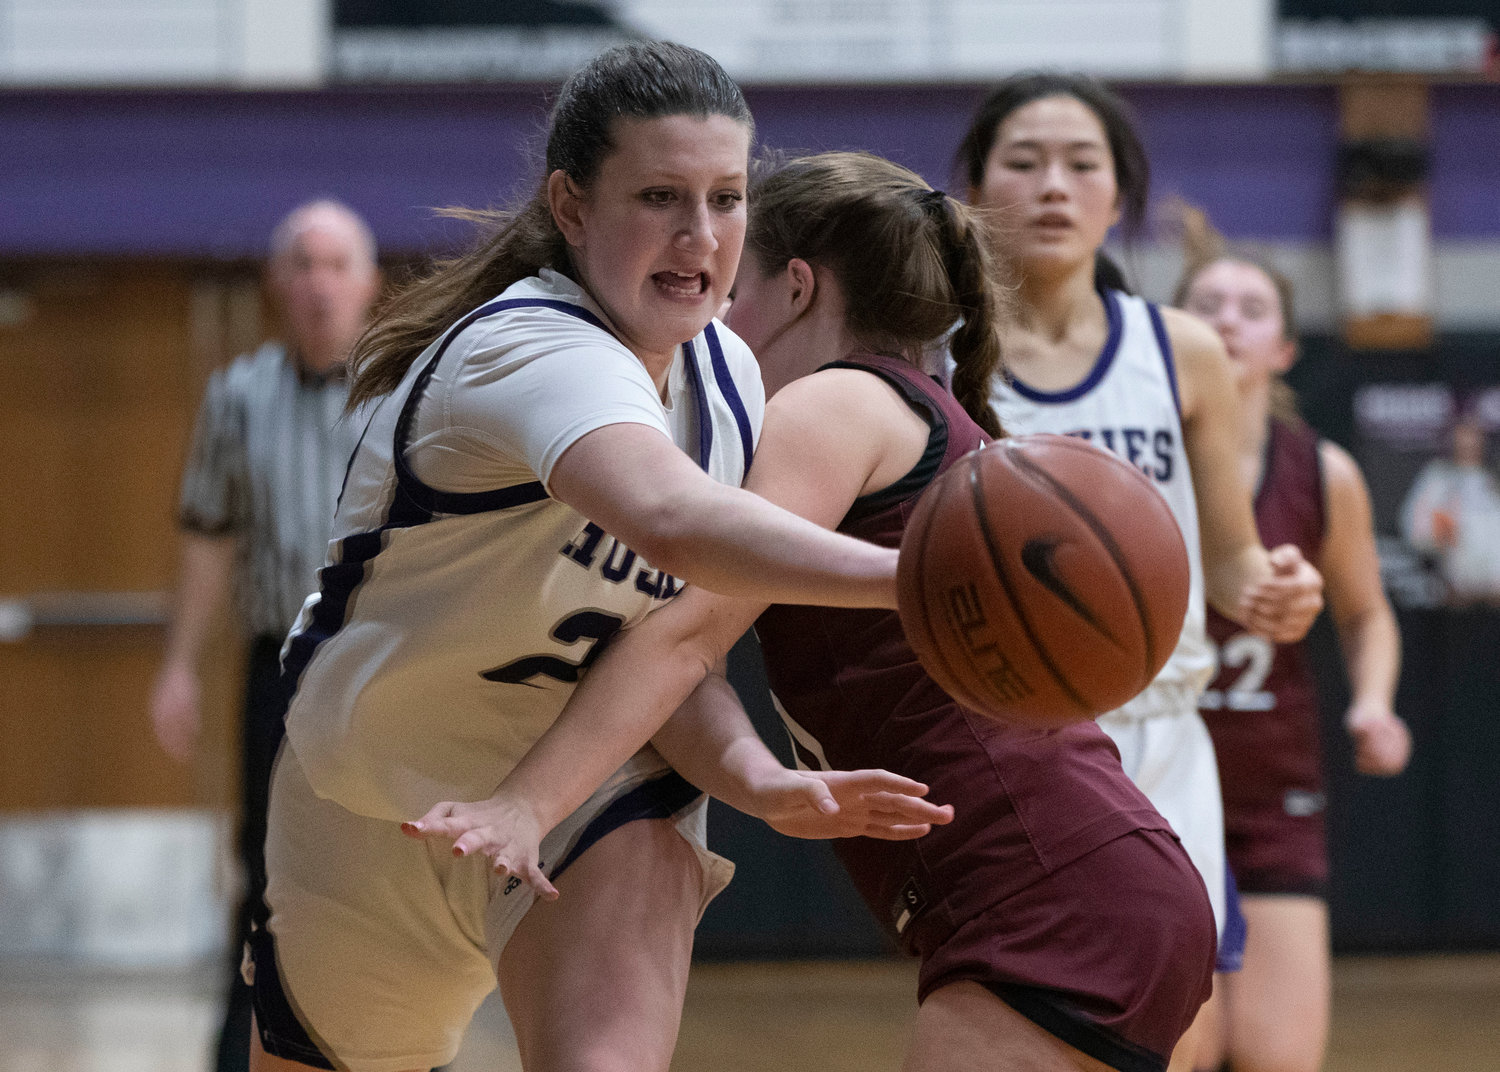 Emily Moran attempts to dribble by a Prout defender. The Huskies beat Prout 45-34 in a Division II game on Tuesday night.